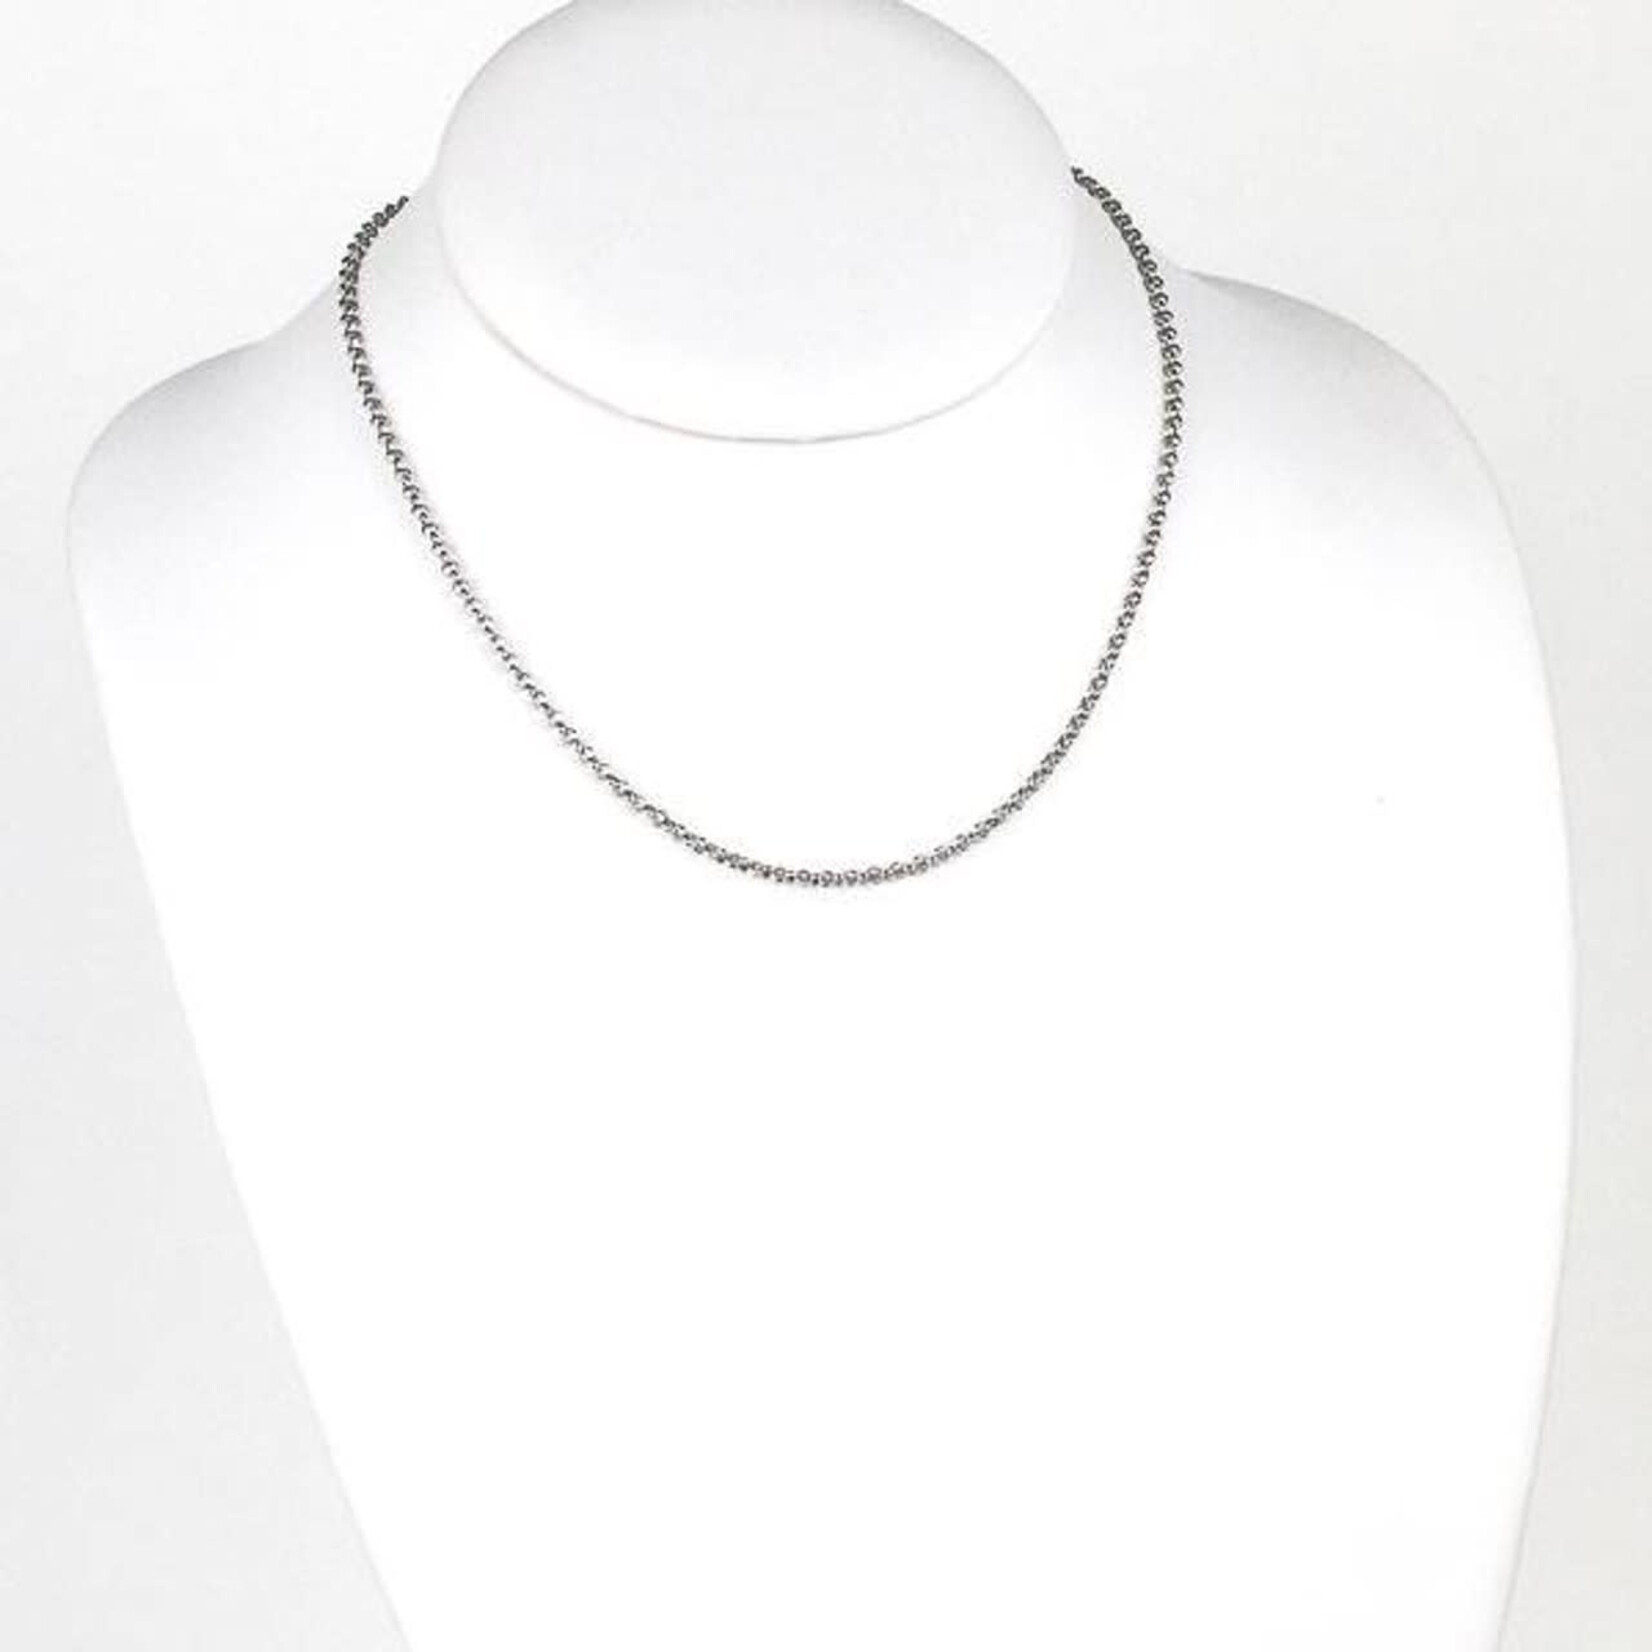 Silver Stainless Steel 2mm Rolo Chain 16" Necklace - Ready to Wear